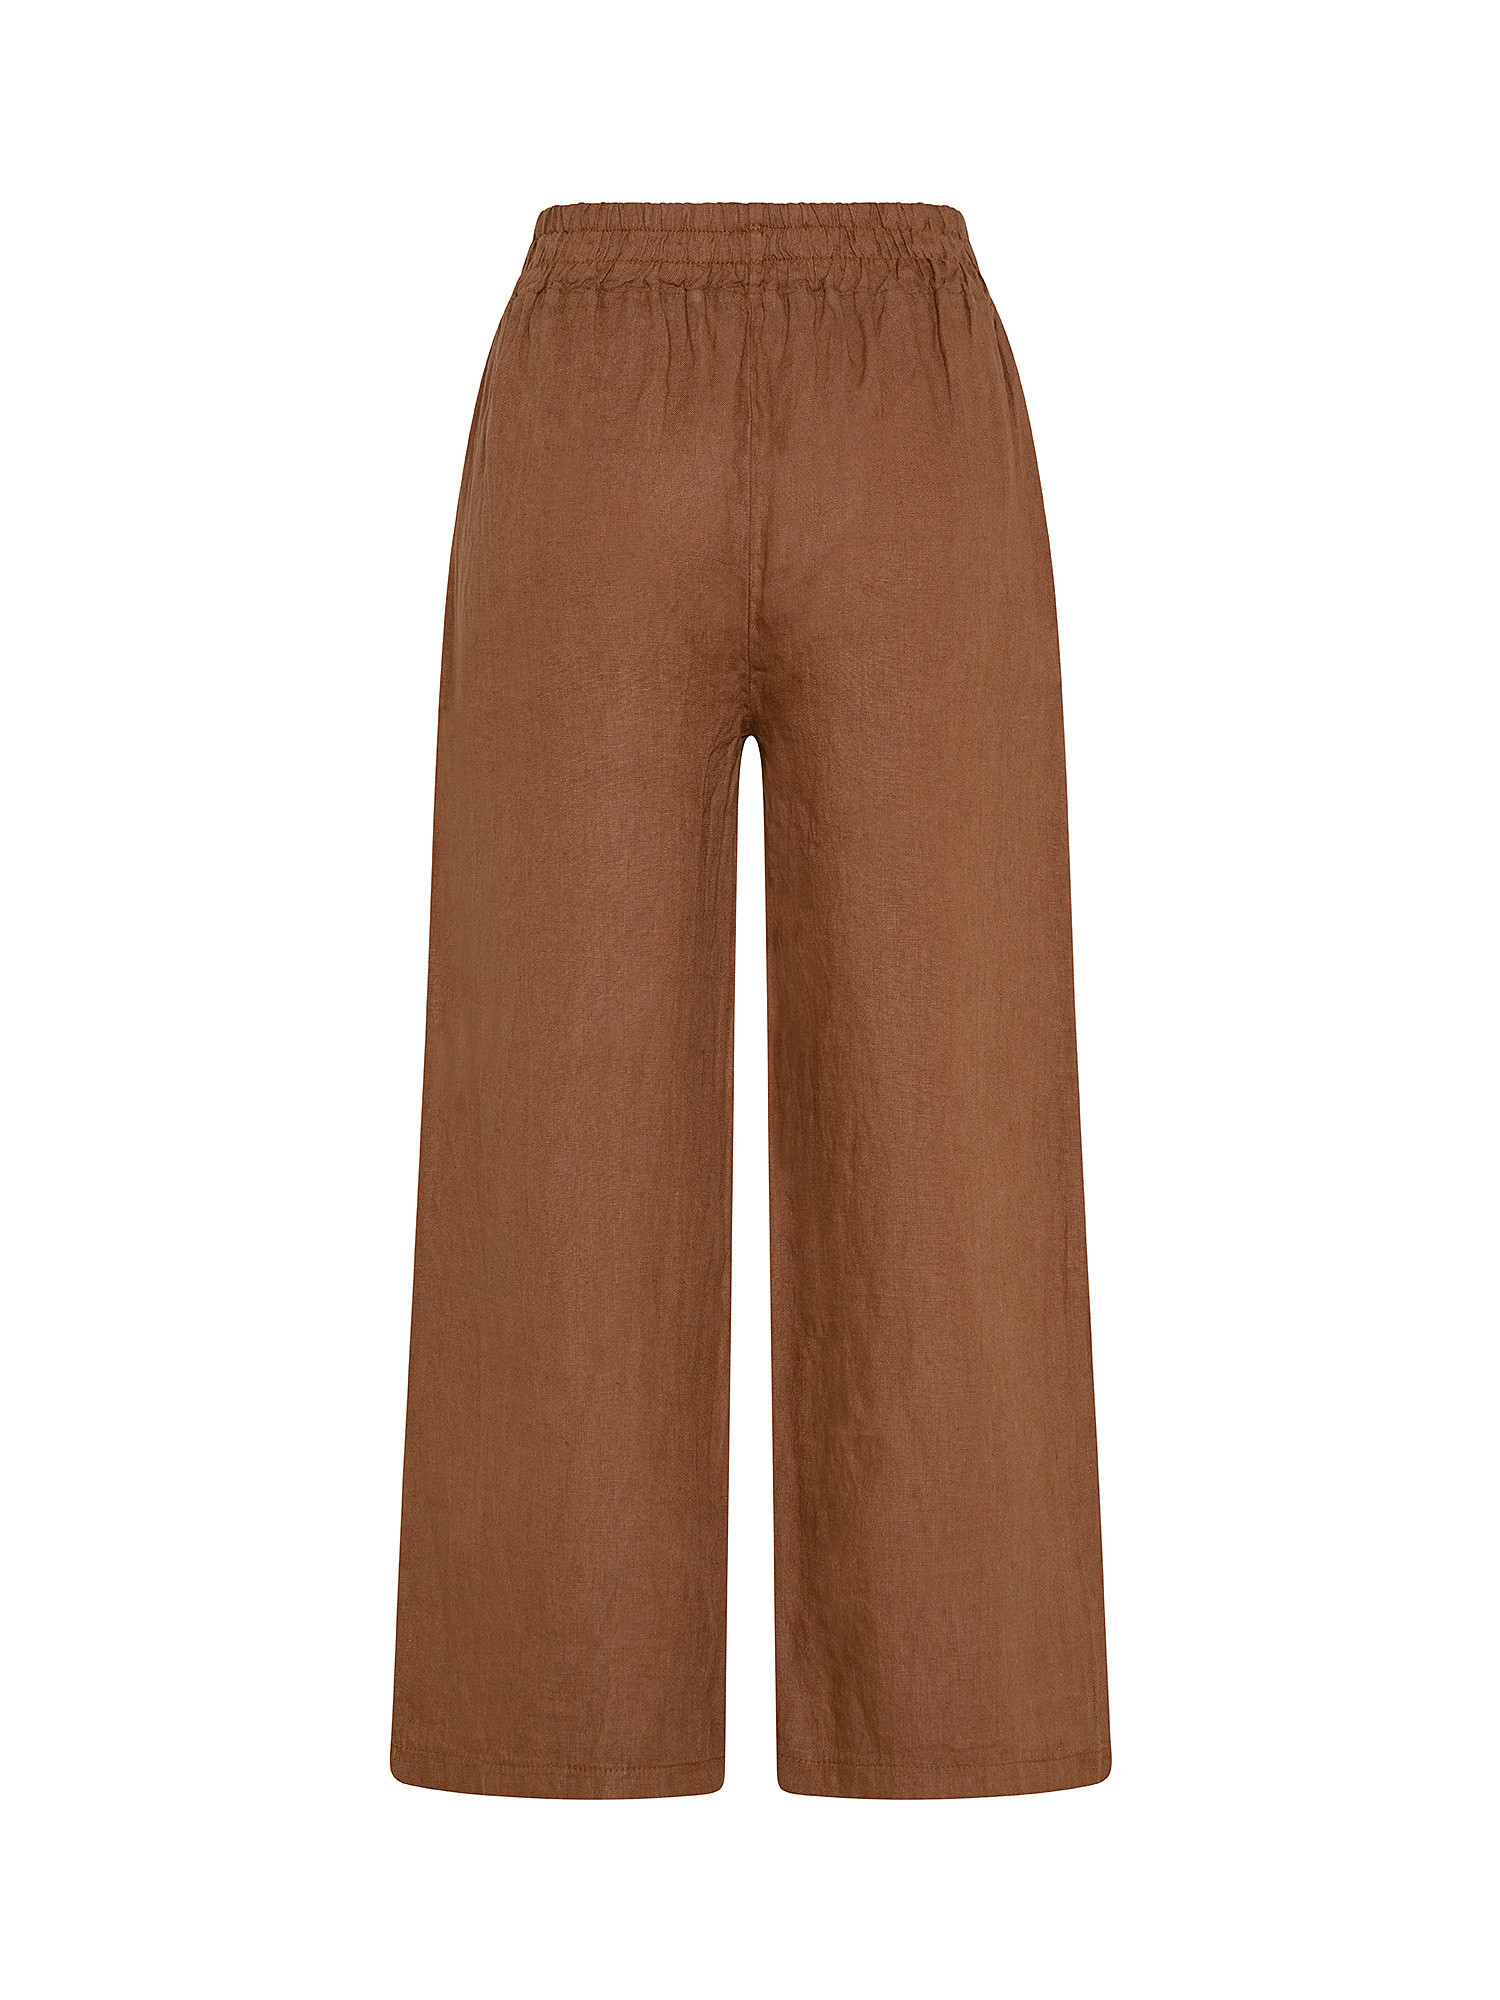 Pure linen trousers with sash, Brown, large image number 1